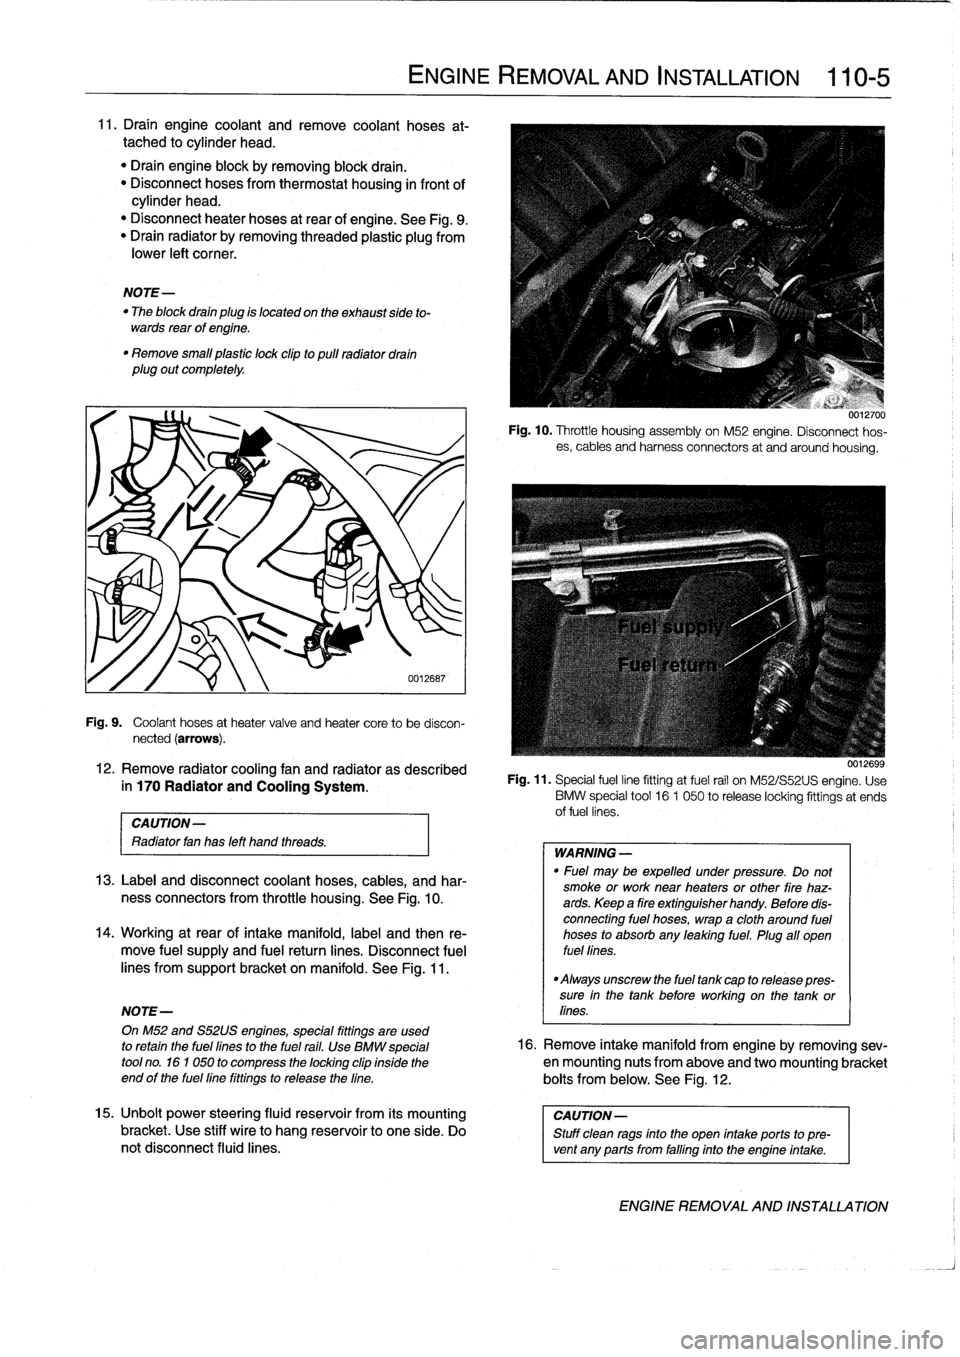 BMW 318i 1998 E36 Workshop Manual 
11
.
Draín
engine
coolant
and
Rmove
coolant
hoses
at-
tached
to
cylinder
head
.

"
Drain
engine
block
byremoving
block
drain
.
"
Disconnect
hoses
from
thermostat
housing
in
front
of
cylinder
head
.
